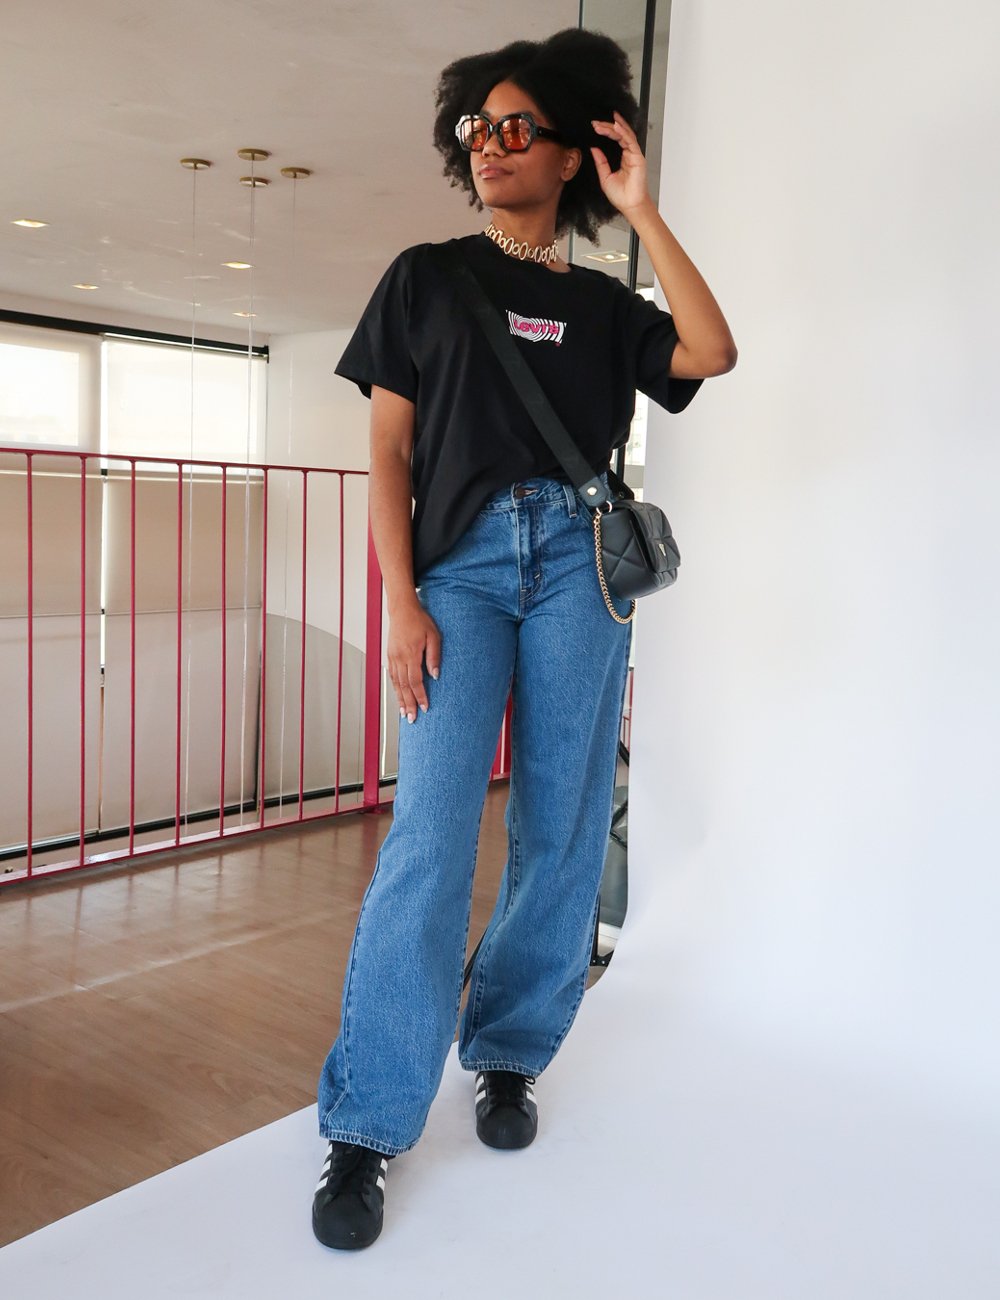 Mayra Souza - jeans e camiseta - looks clássicos - jeans - Levis - https://stealthelook.com.br